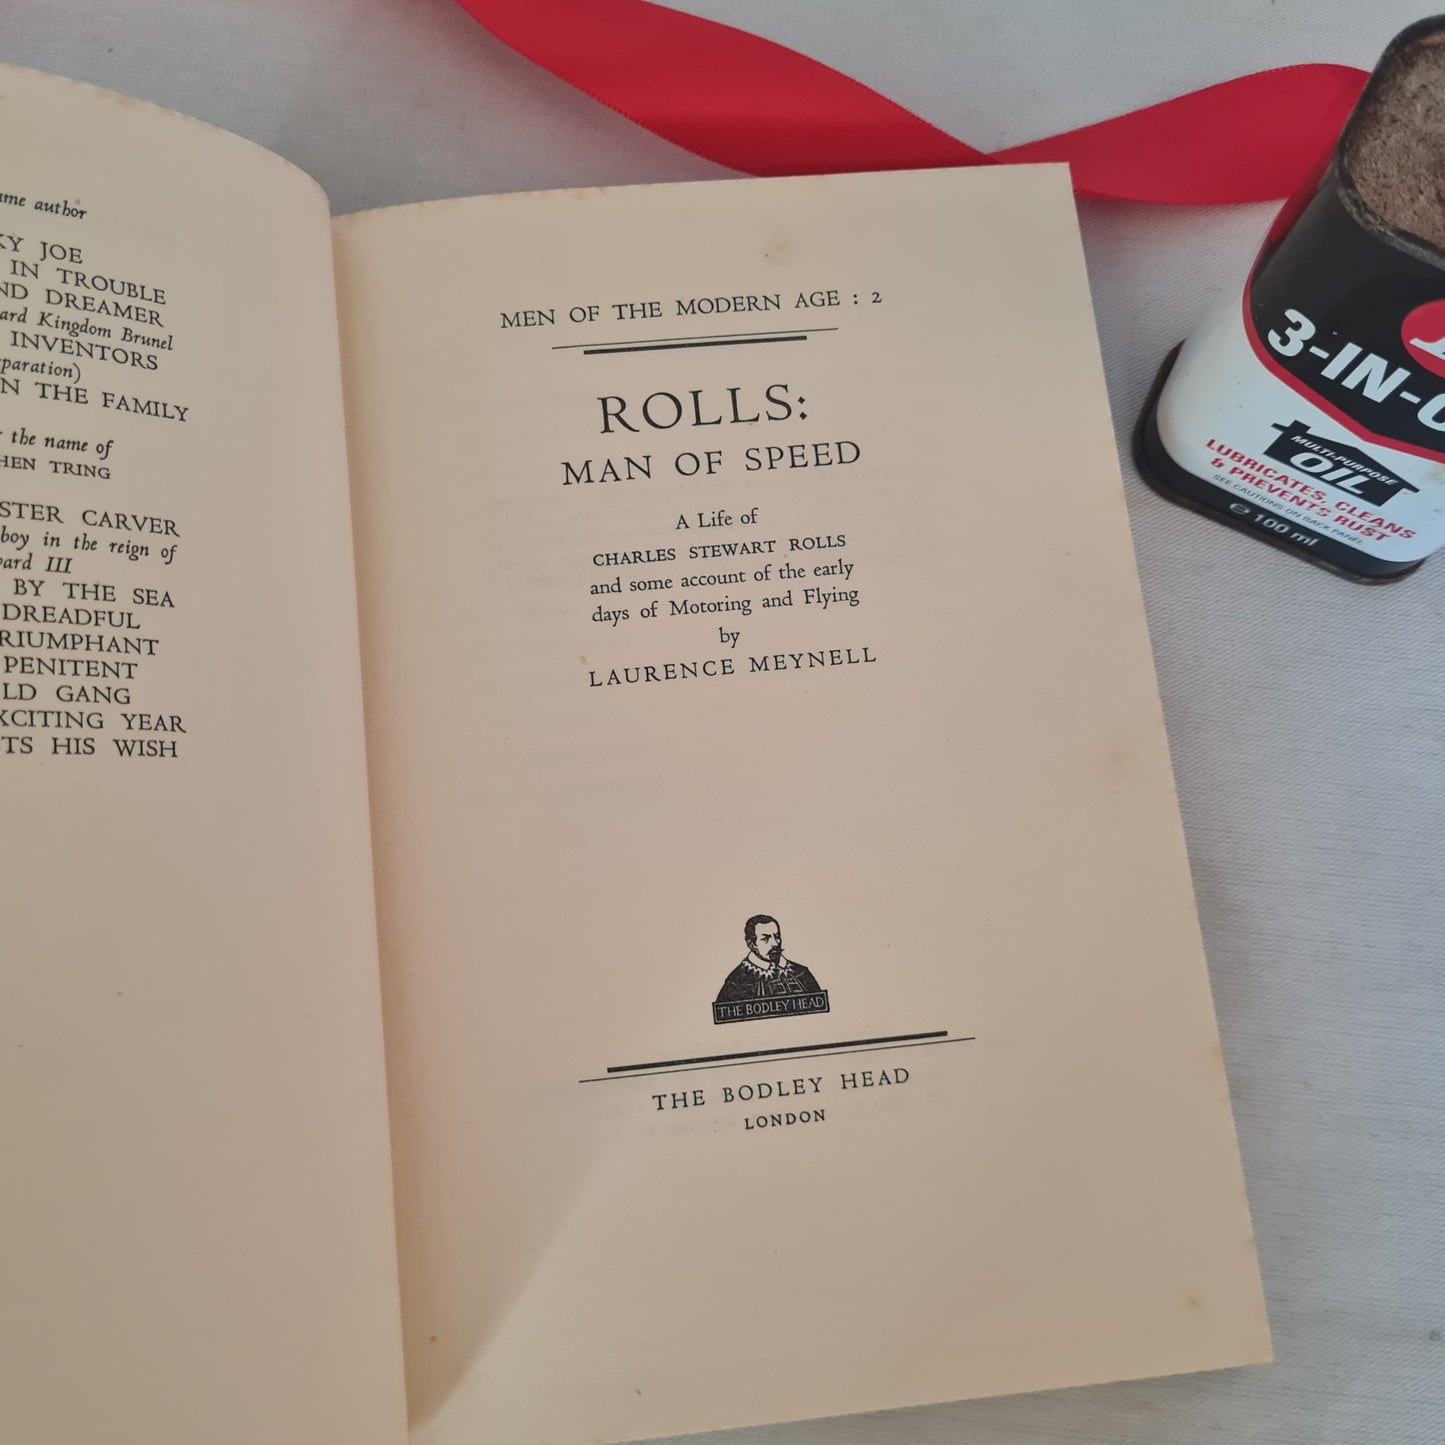 1953 Rolls: Man of Speed A Life of Charles Stewart Rolls, Some Account of the Early Days of Motoring and Flying / FIRST Edition, Bodley Head